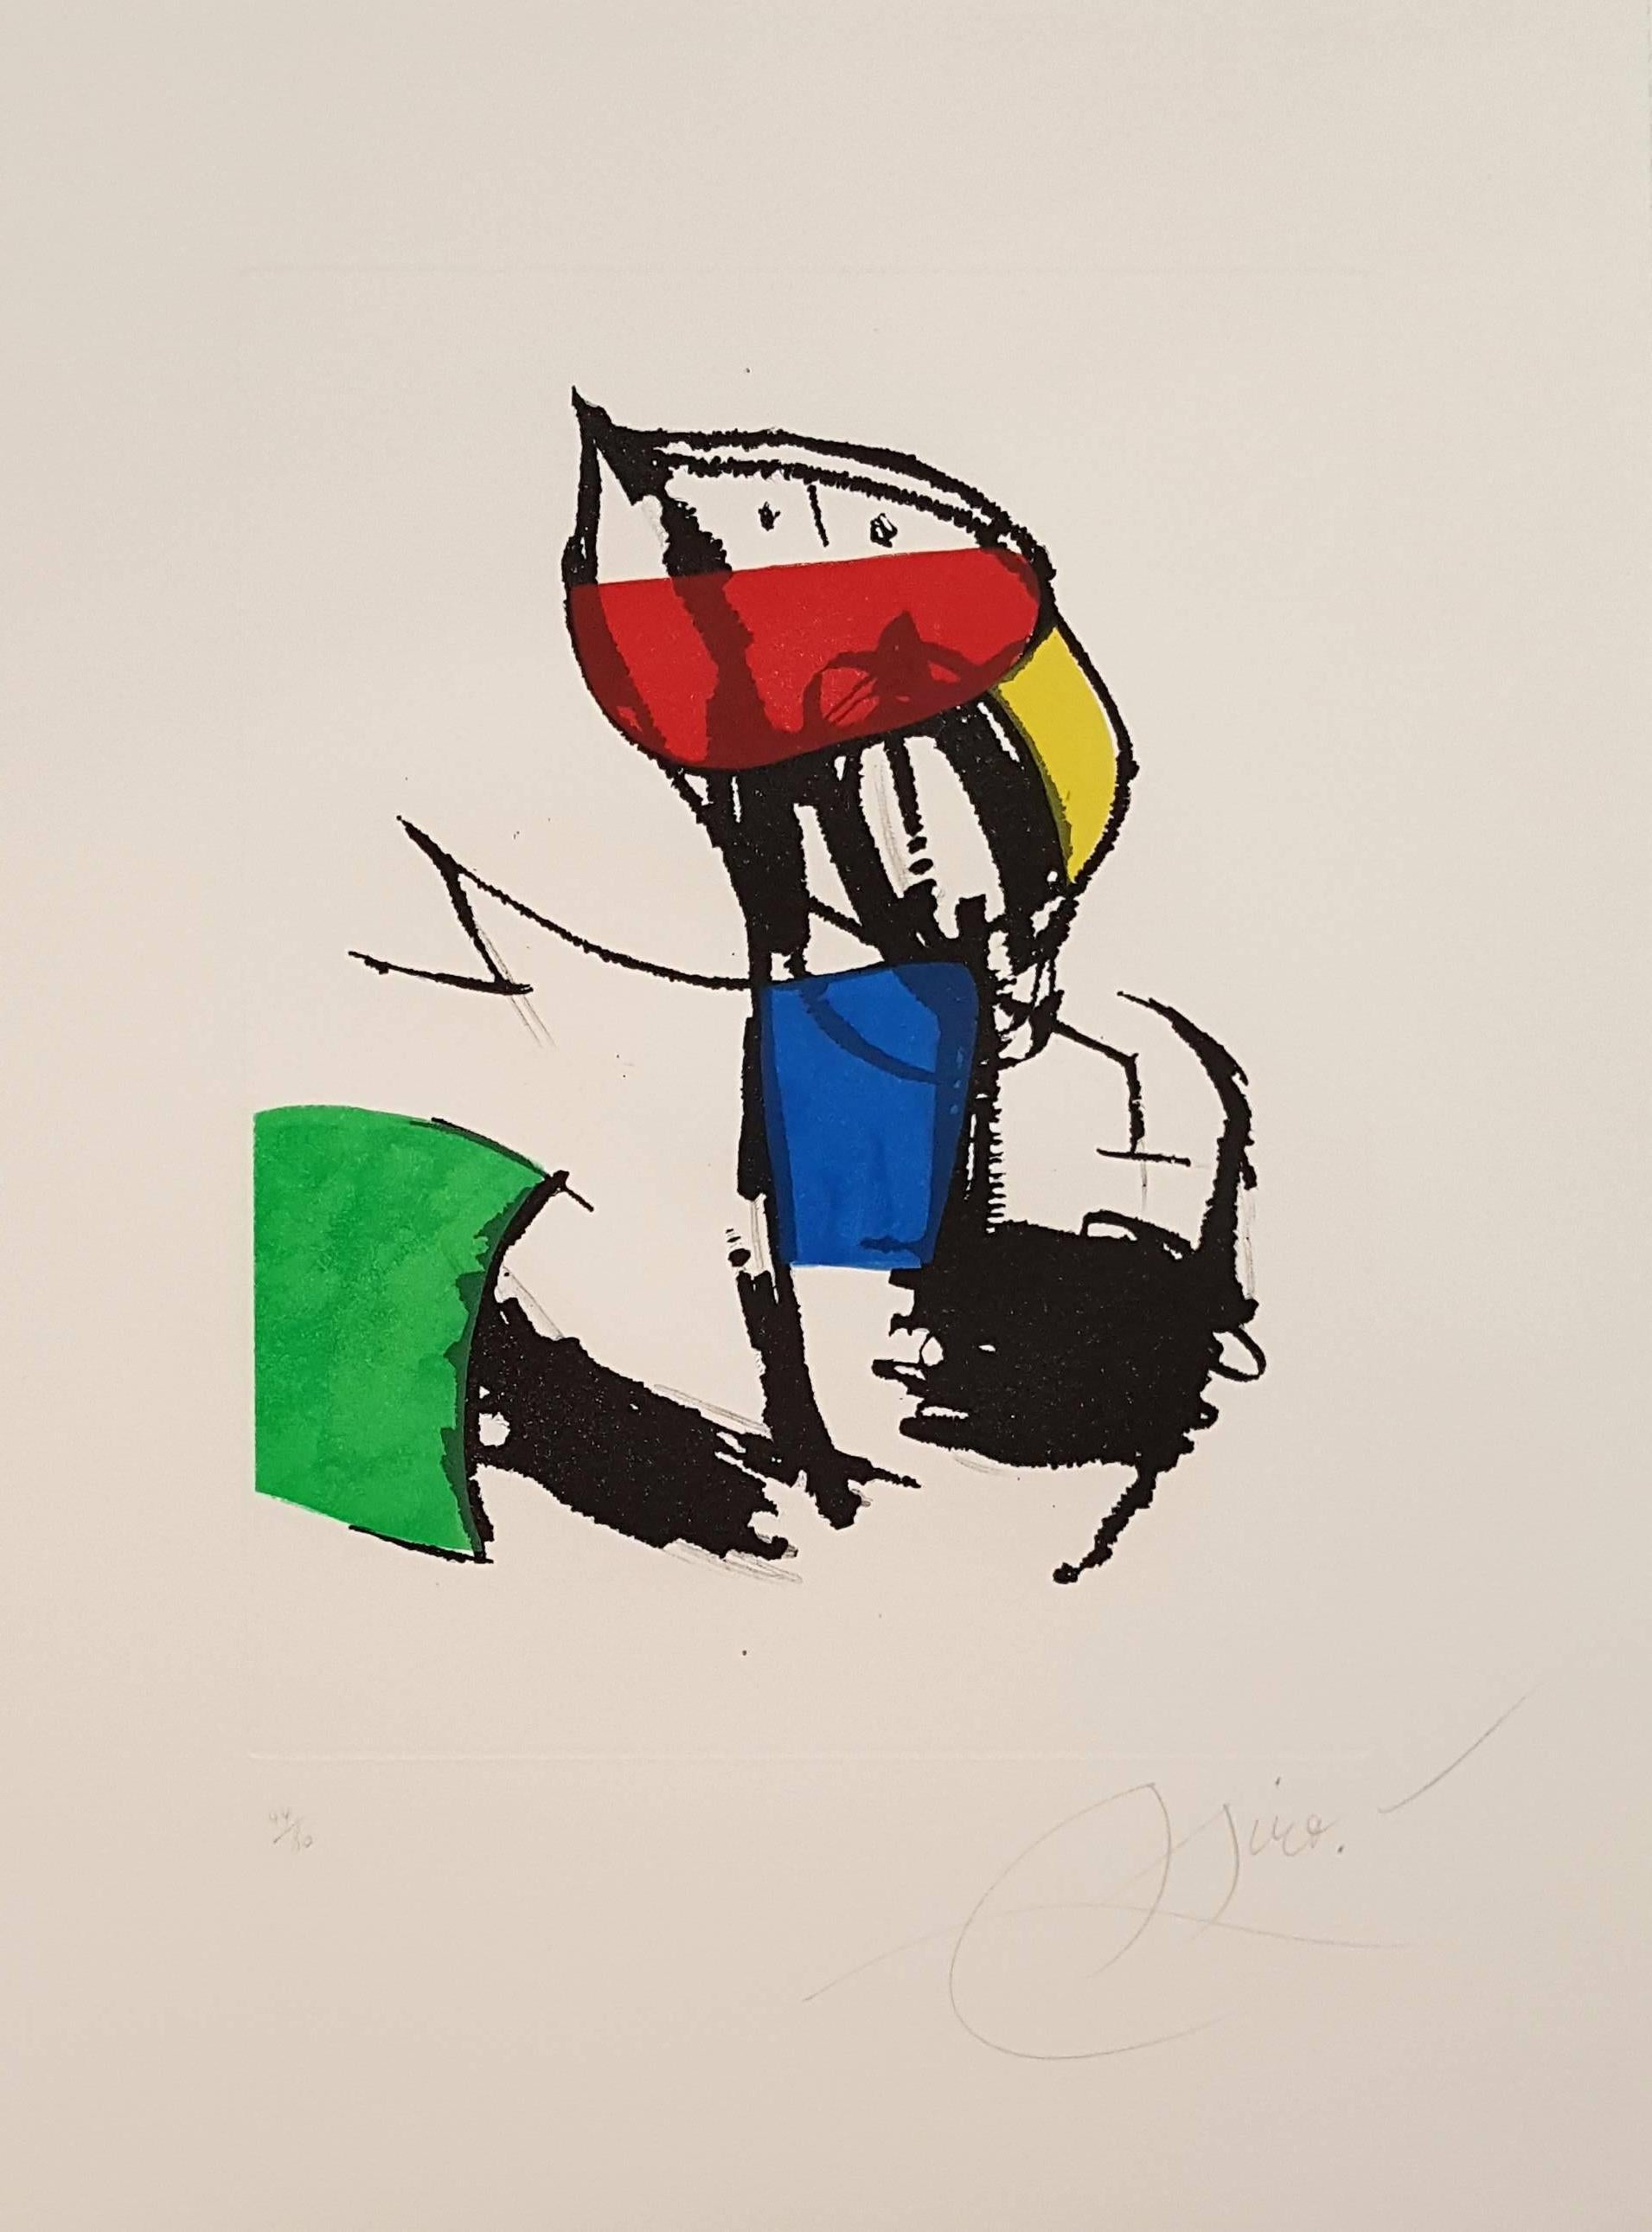 Joan Miró Abstract Print - Singer of the streets - Original Etching Handsigned 